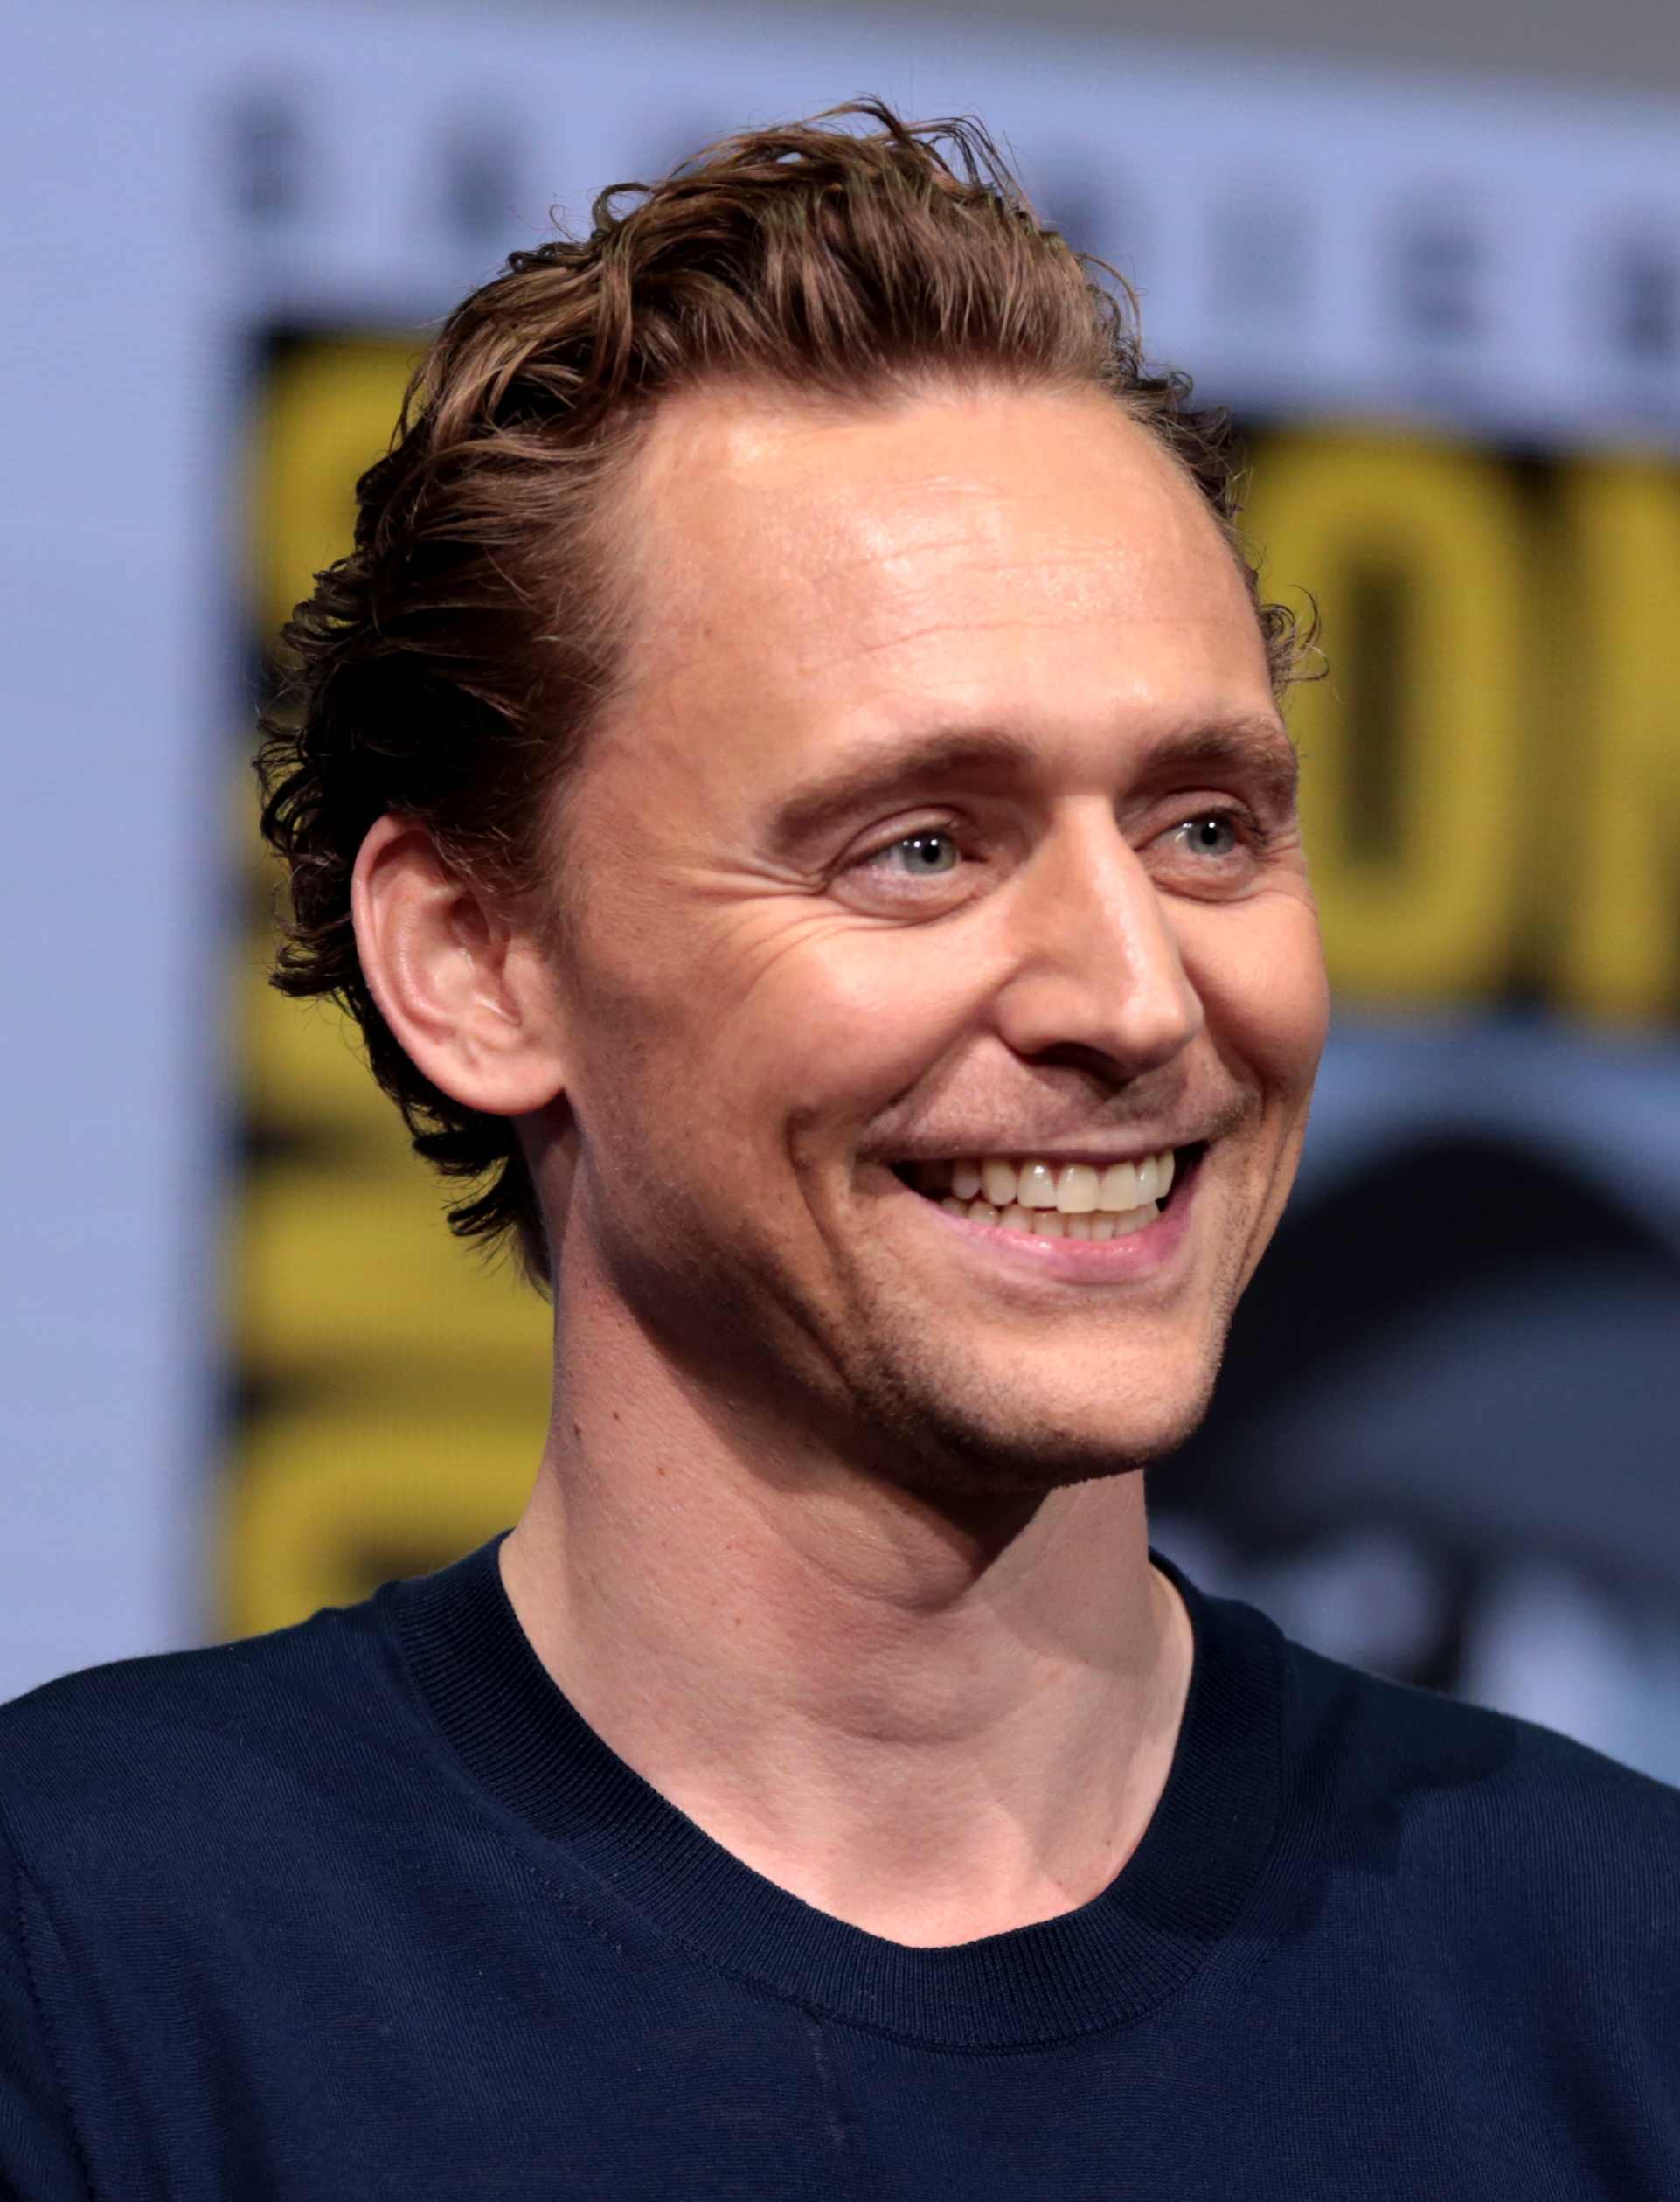 Tom Hiddleston speaking at the 2017 San Diego Comic Con International as taken by Gage Skidmore. Hiddleston's words on goals can serve as an inspiration to students.